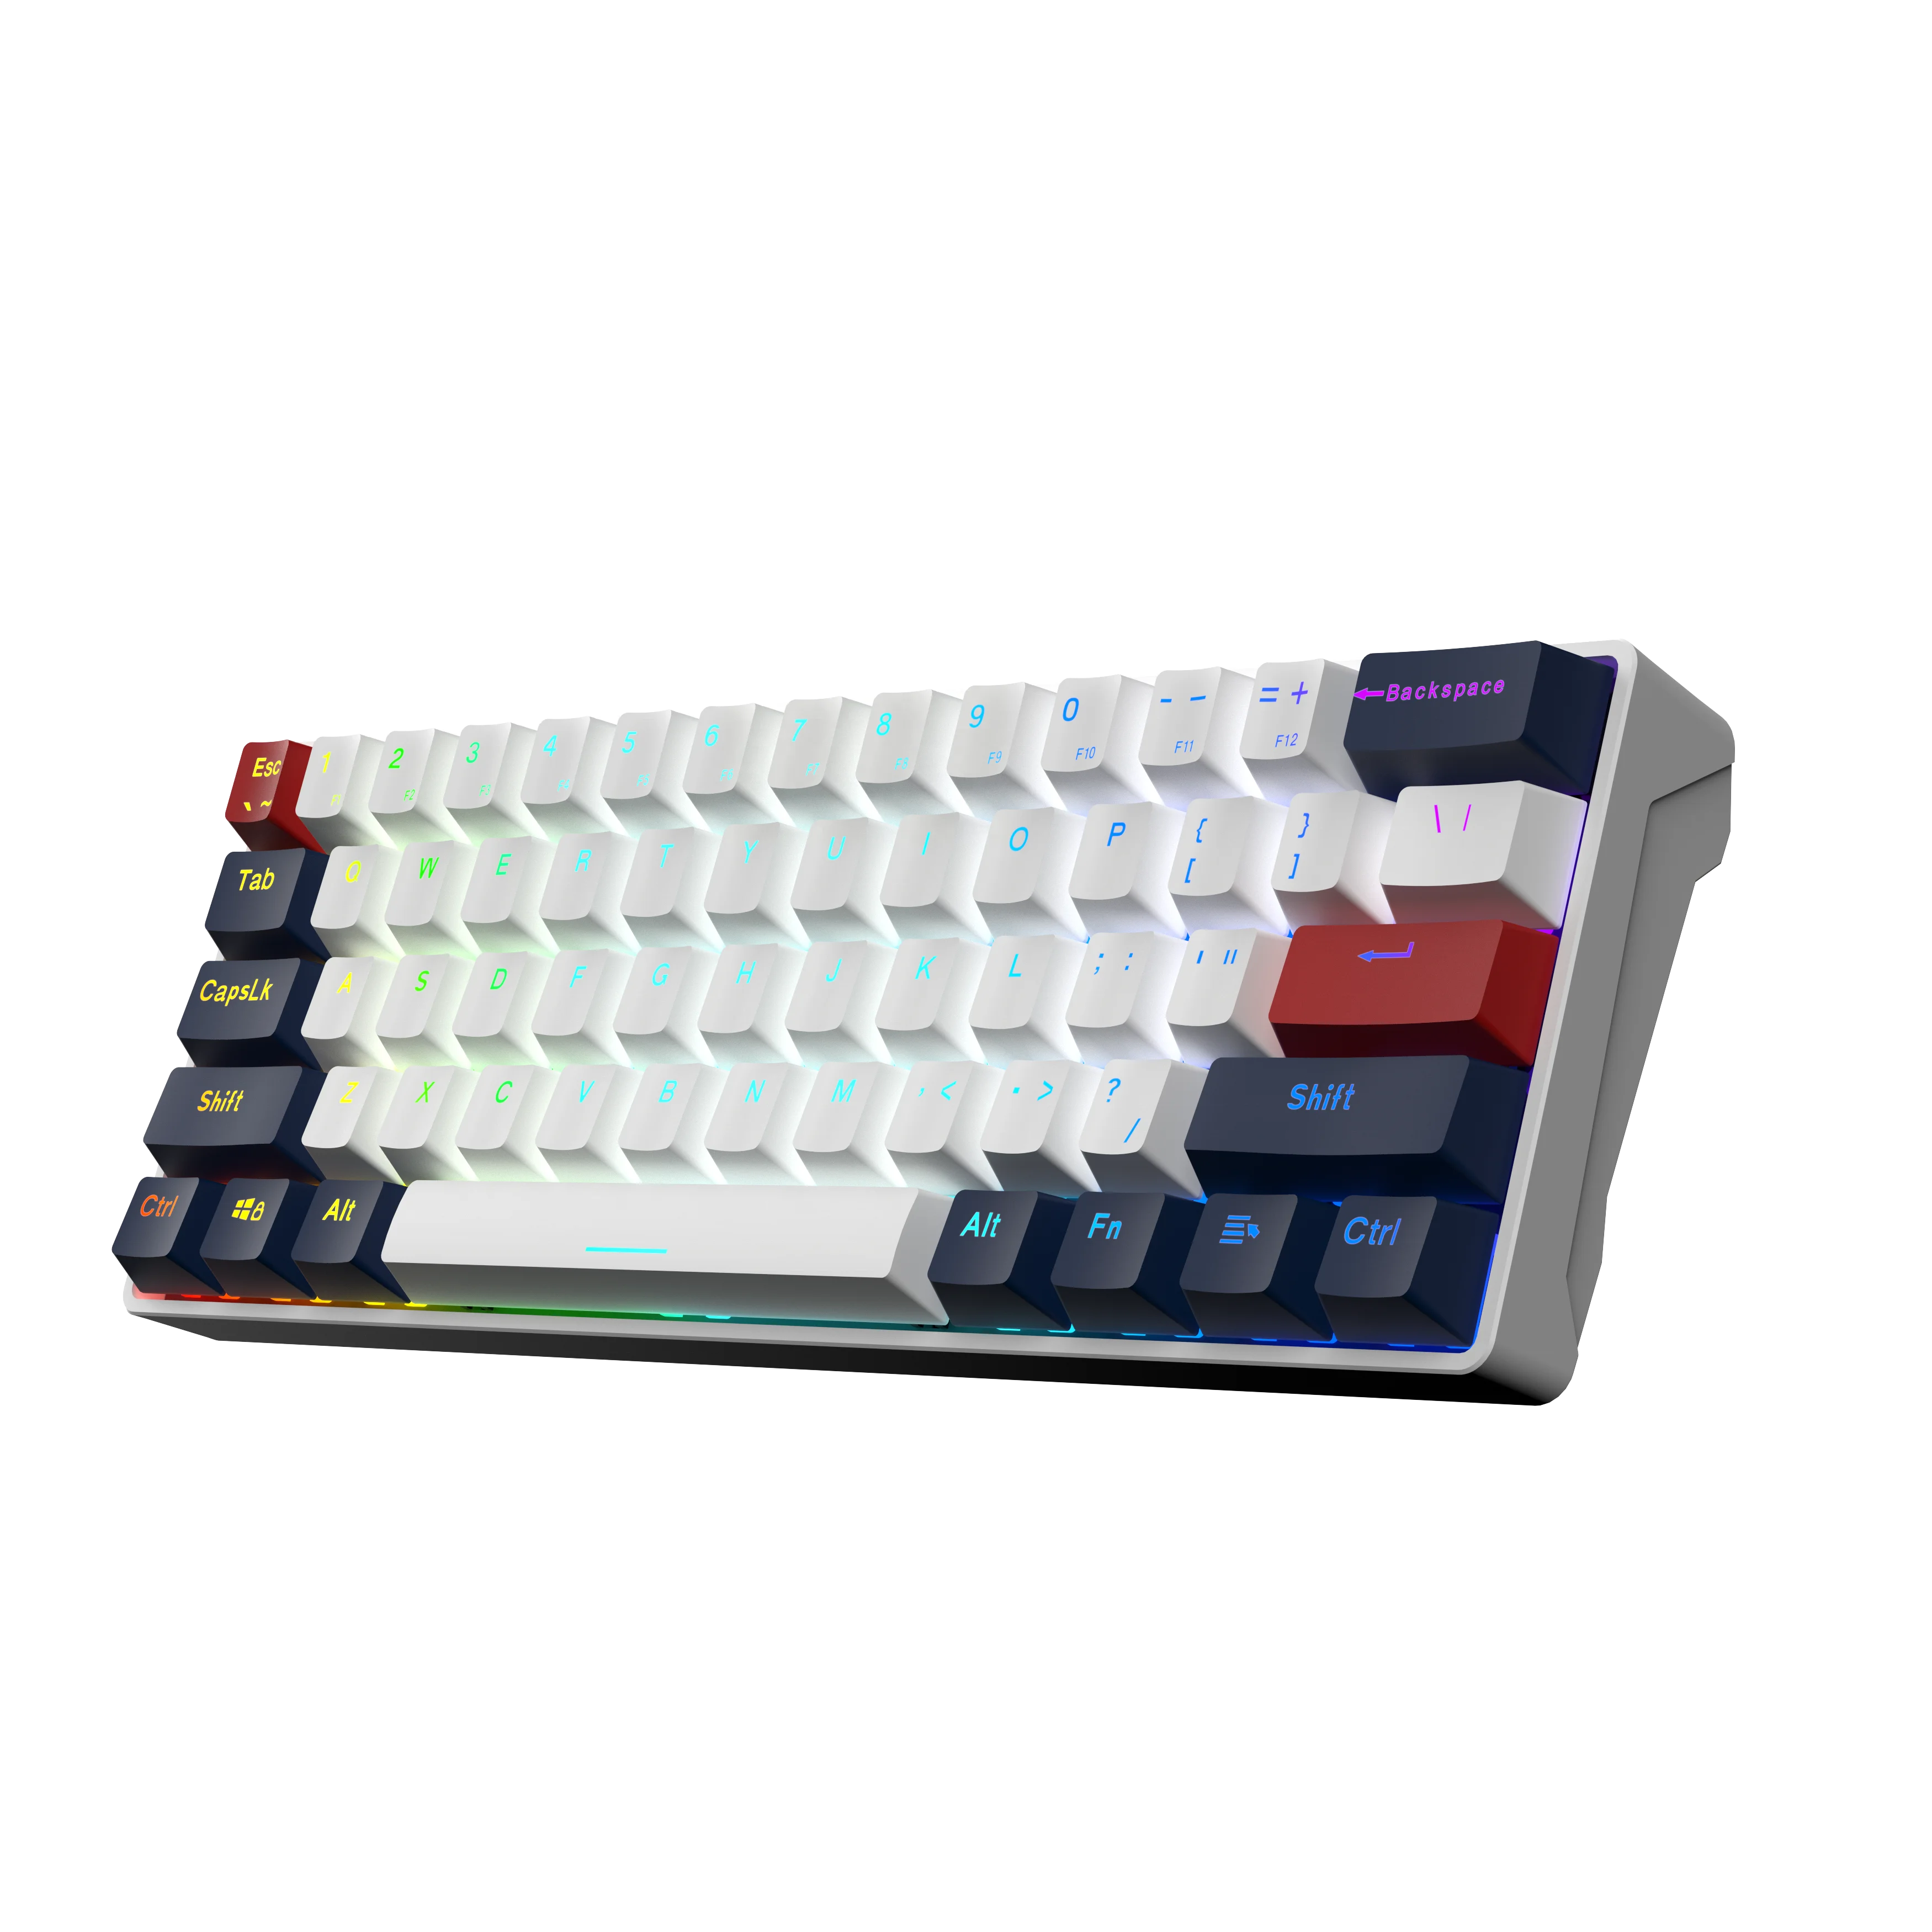 

Hot selling Backlight MINI Waterproof 60% mechanical ABS double color keycap 61 key wired keyboard Gaming, Black,purple, red, blue, green